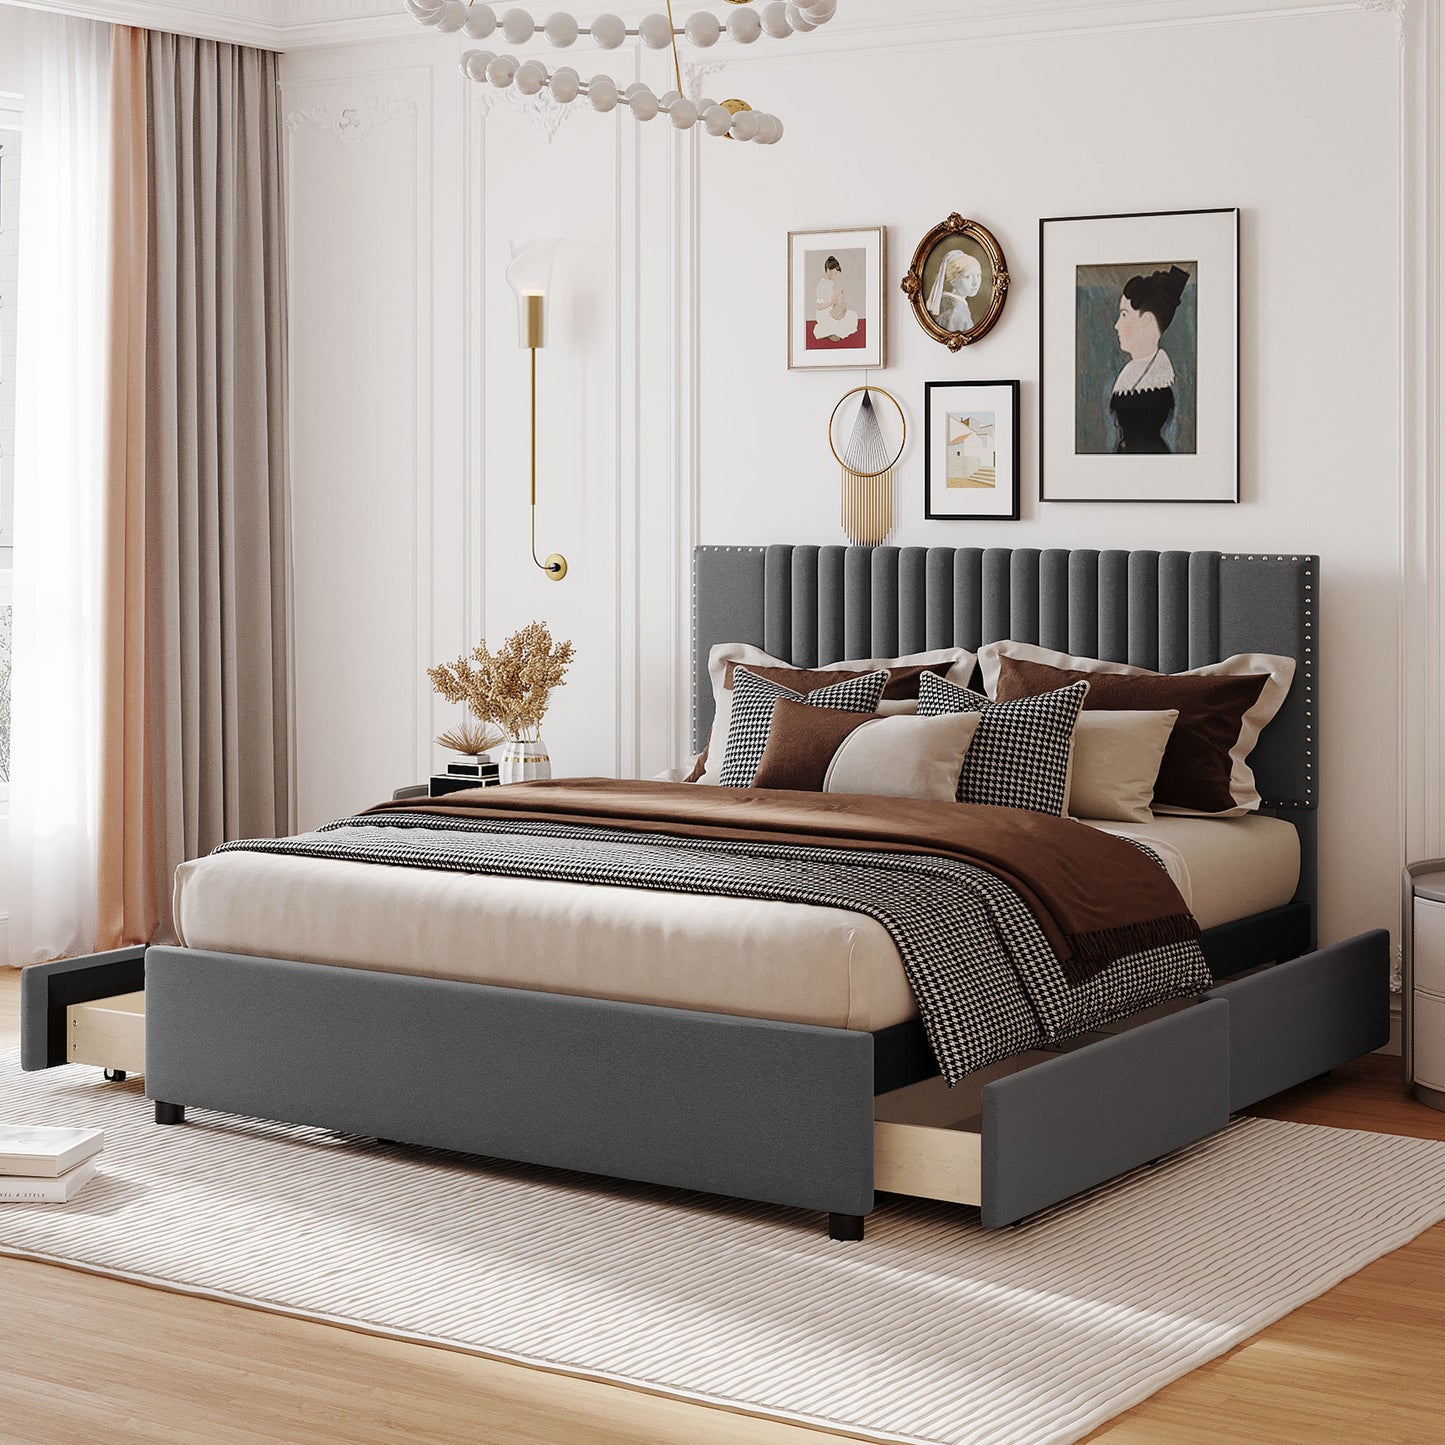 Queen Size Upholstered Platform Bed with Classic Headboard and 4 Drawers, Linen Fabric, Gray